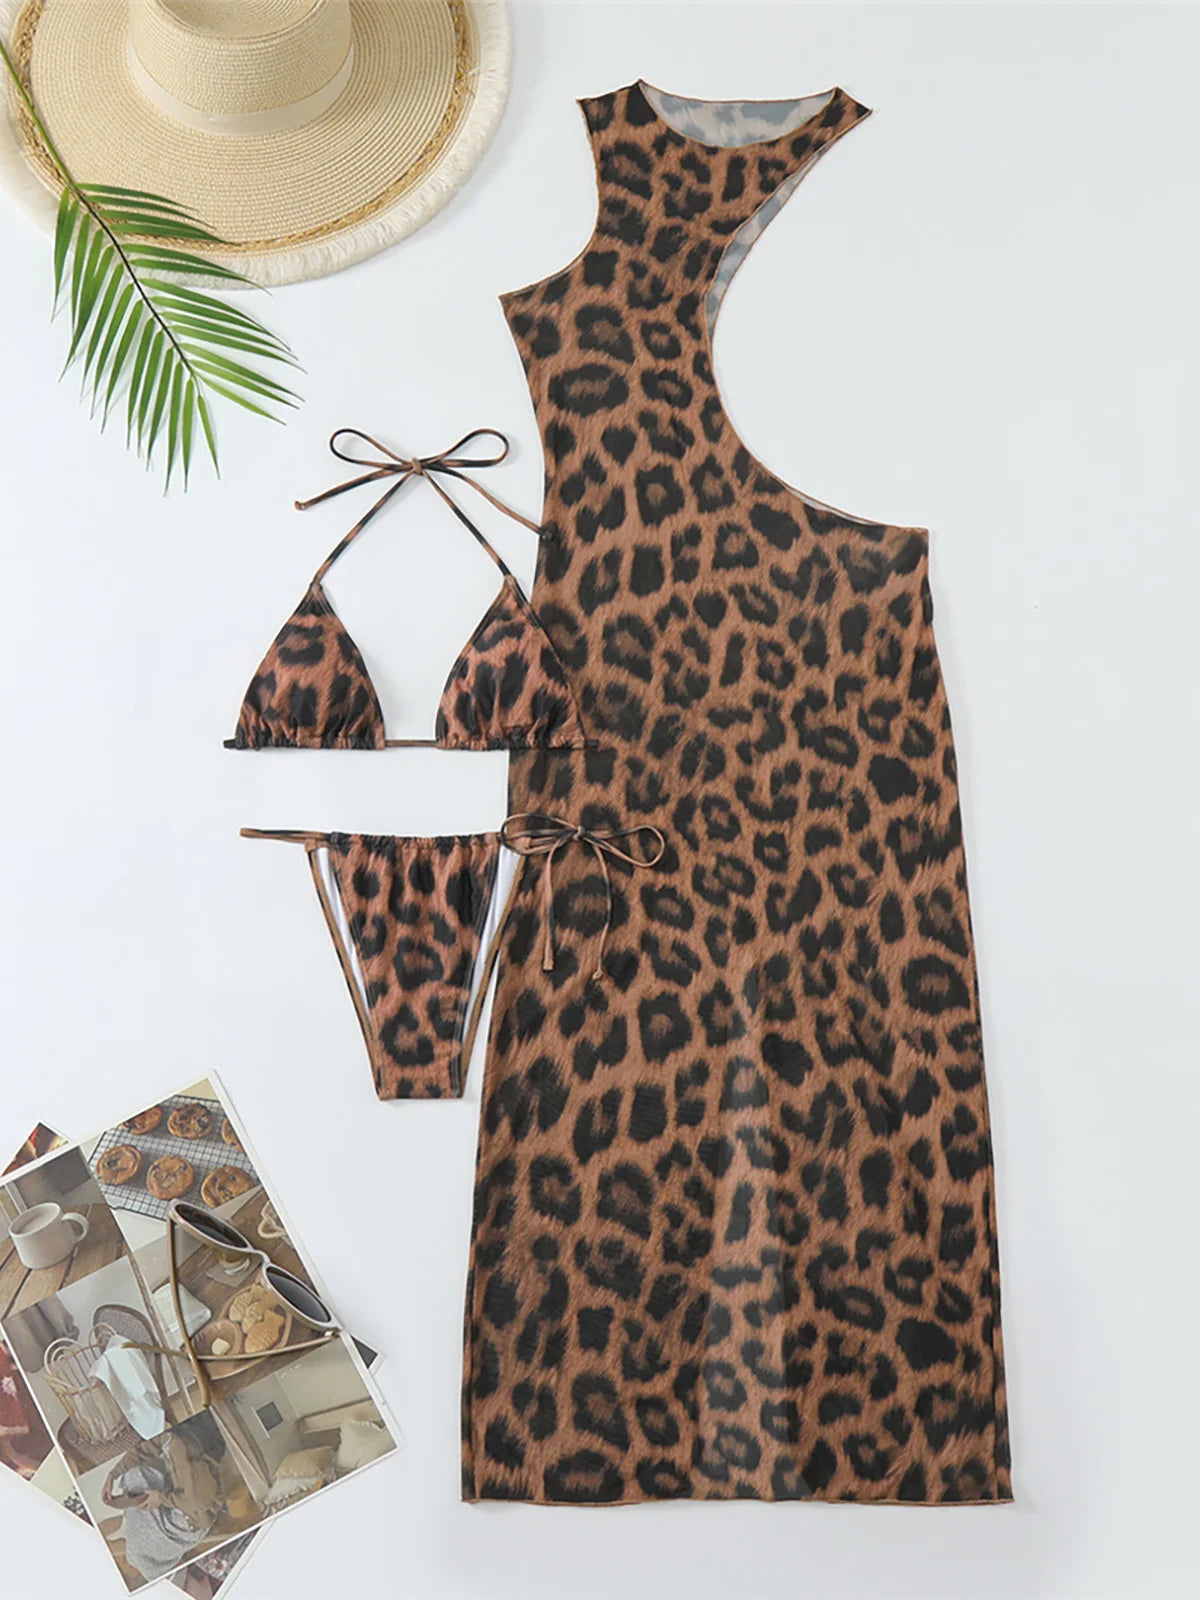 Fierce Leopard Print Halter Bikini Set with Coordinating Cover-Up, Chic Untamed Design, True to Size fits from XS to L for Women, Perfect for Bold and Spirited Beach or Poolside Look, Comes in Classic Leopard Pattern